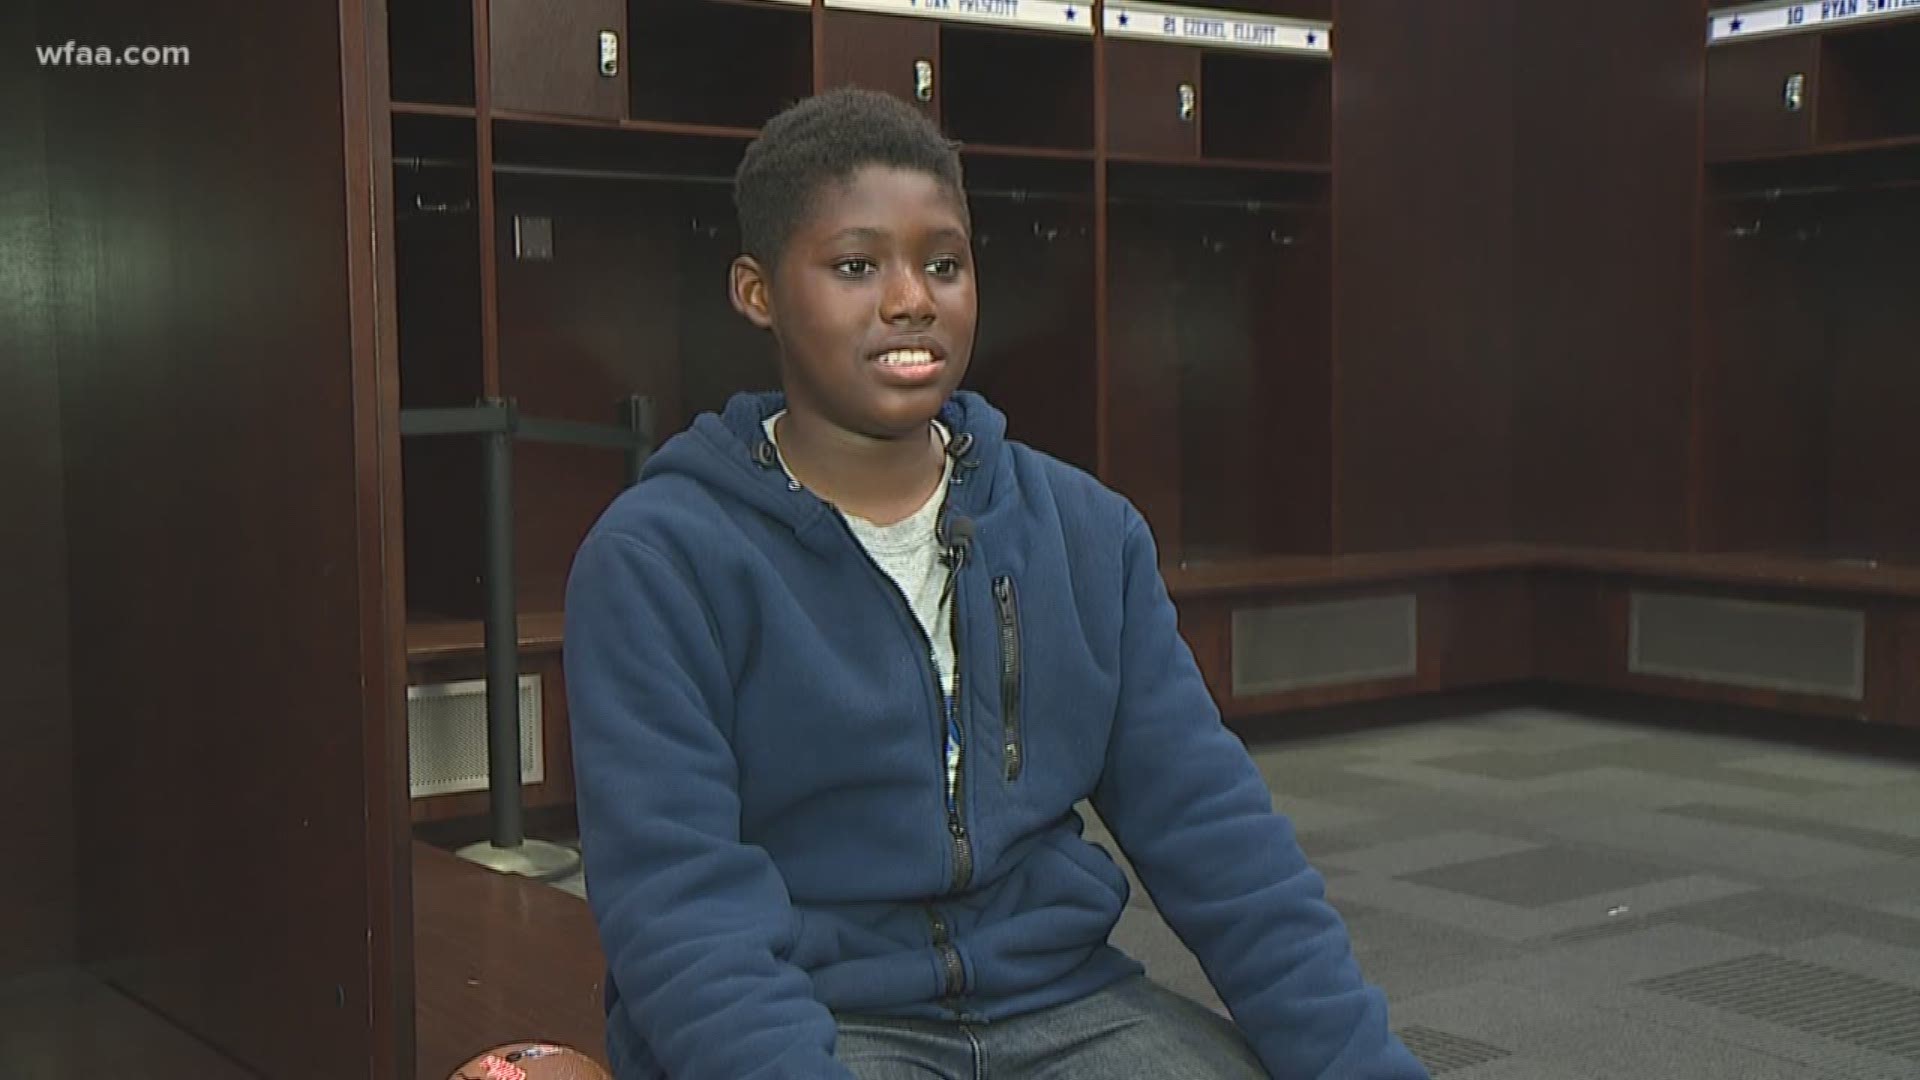 He's only 12 years old and already in foster care way too long."I like playing basketball. I have seven sisters and one brother and I've been in foster care four years," said Ken.